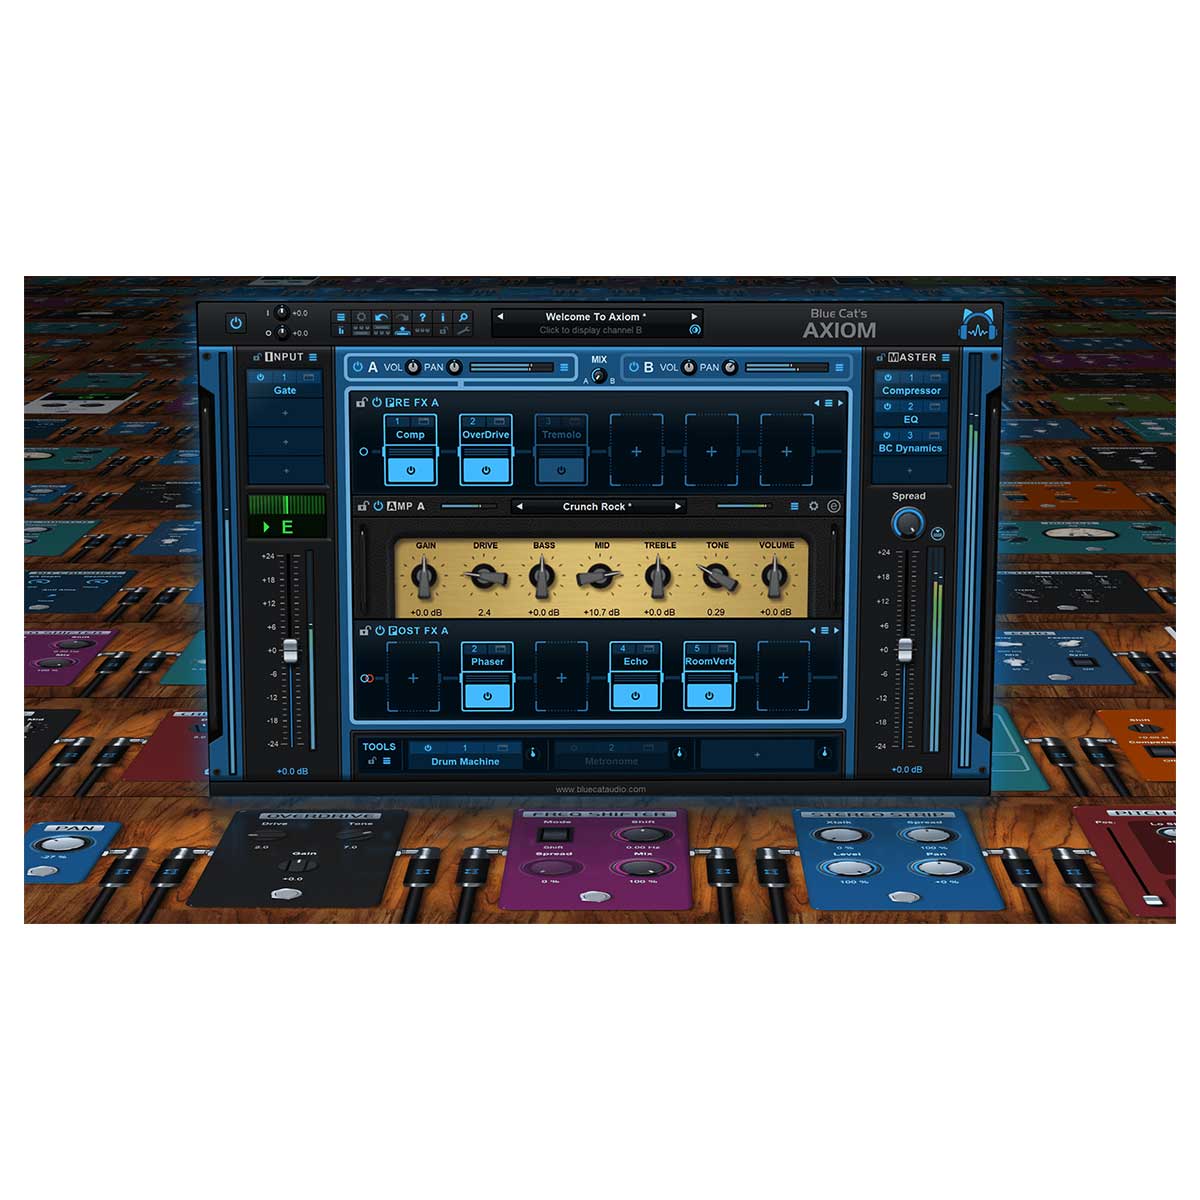 Blue Cat's Axiom Multi-Effects Processor and Amp Simulation Software for Guitar and BassBlue Cat's Axiom Multi-Effects Processor and Amp Simulation Software for Guitar and Bass